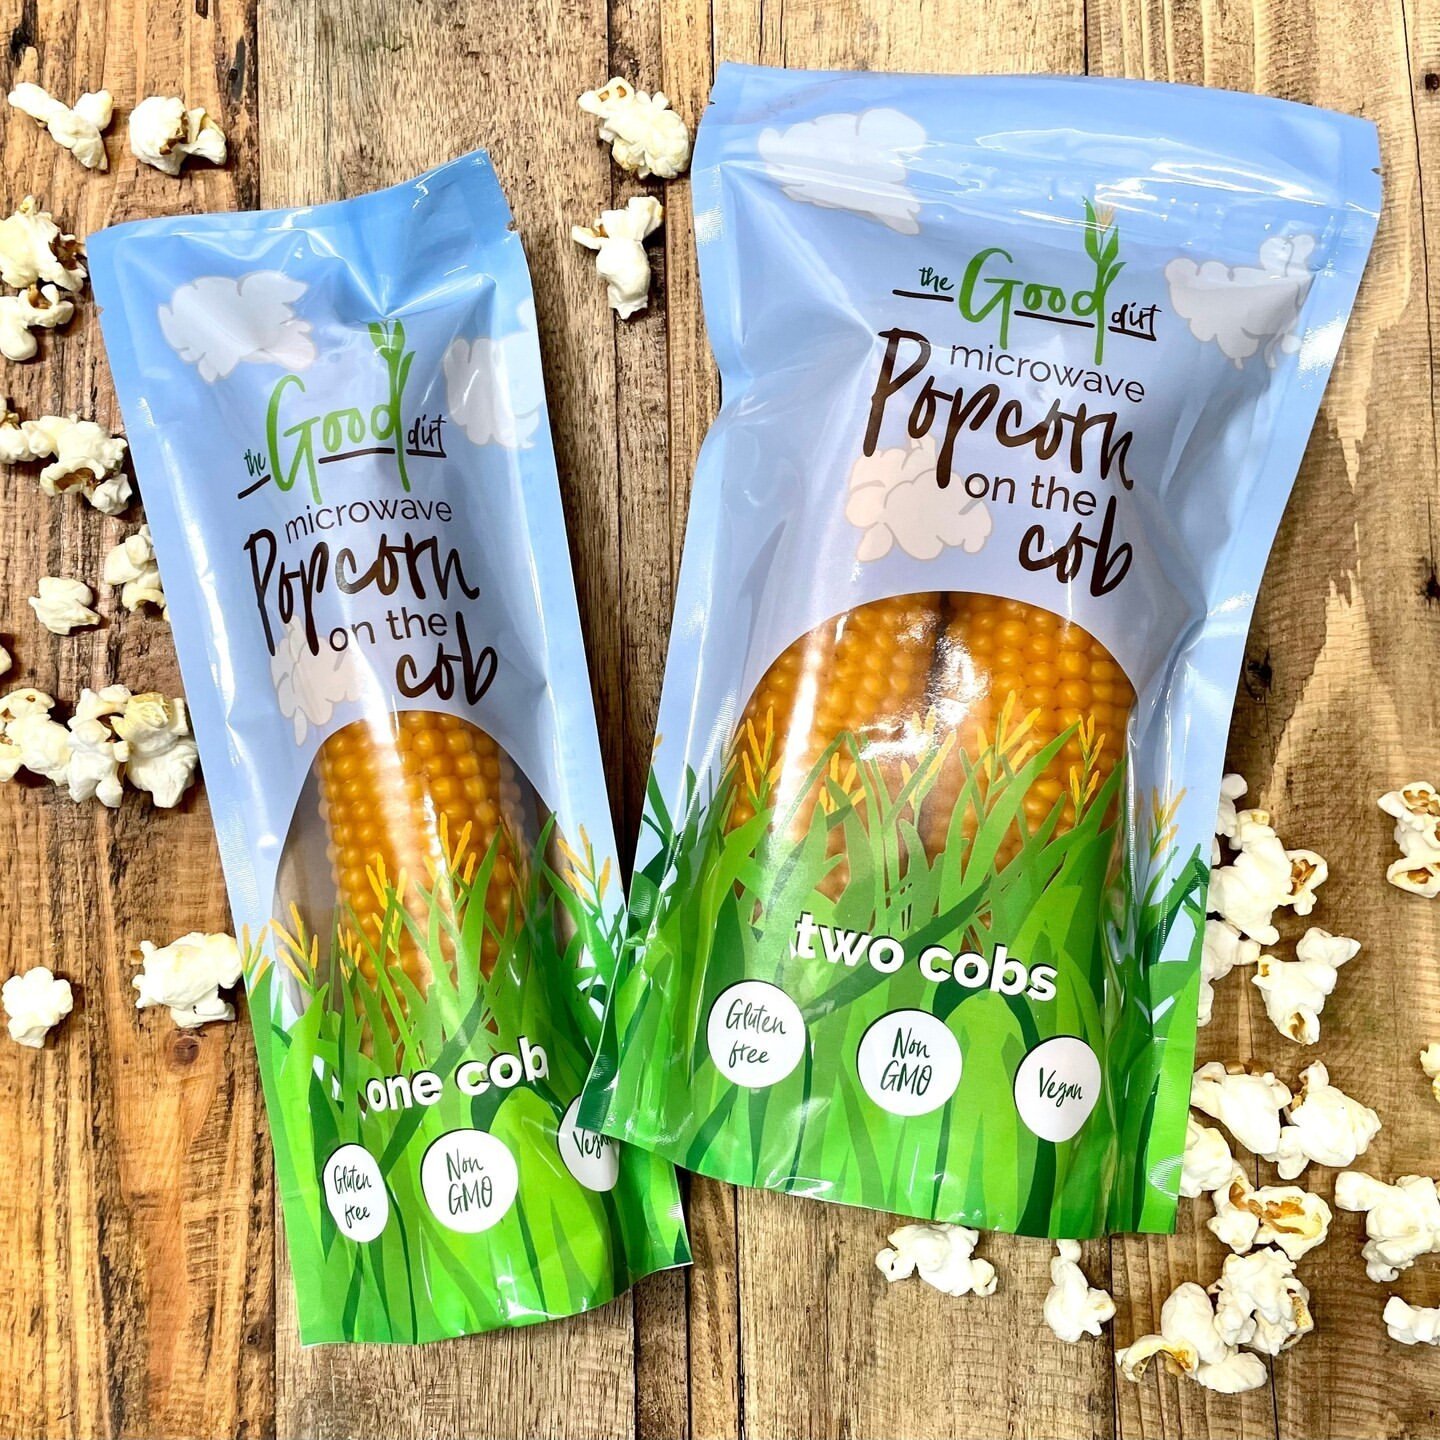 Repost thanks to our new stockists Wilsons Fruit &amp; Vegetables. 🤗 

🍿Fresh, natural &amp; healthy Popcorn in 3 easy steps🍿⁠
@Gooddirtfoods have made movie nights more exciting!⁠
⁠
The whole dried corn cob goes in the bag provided, microwave and